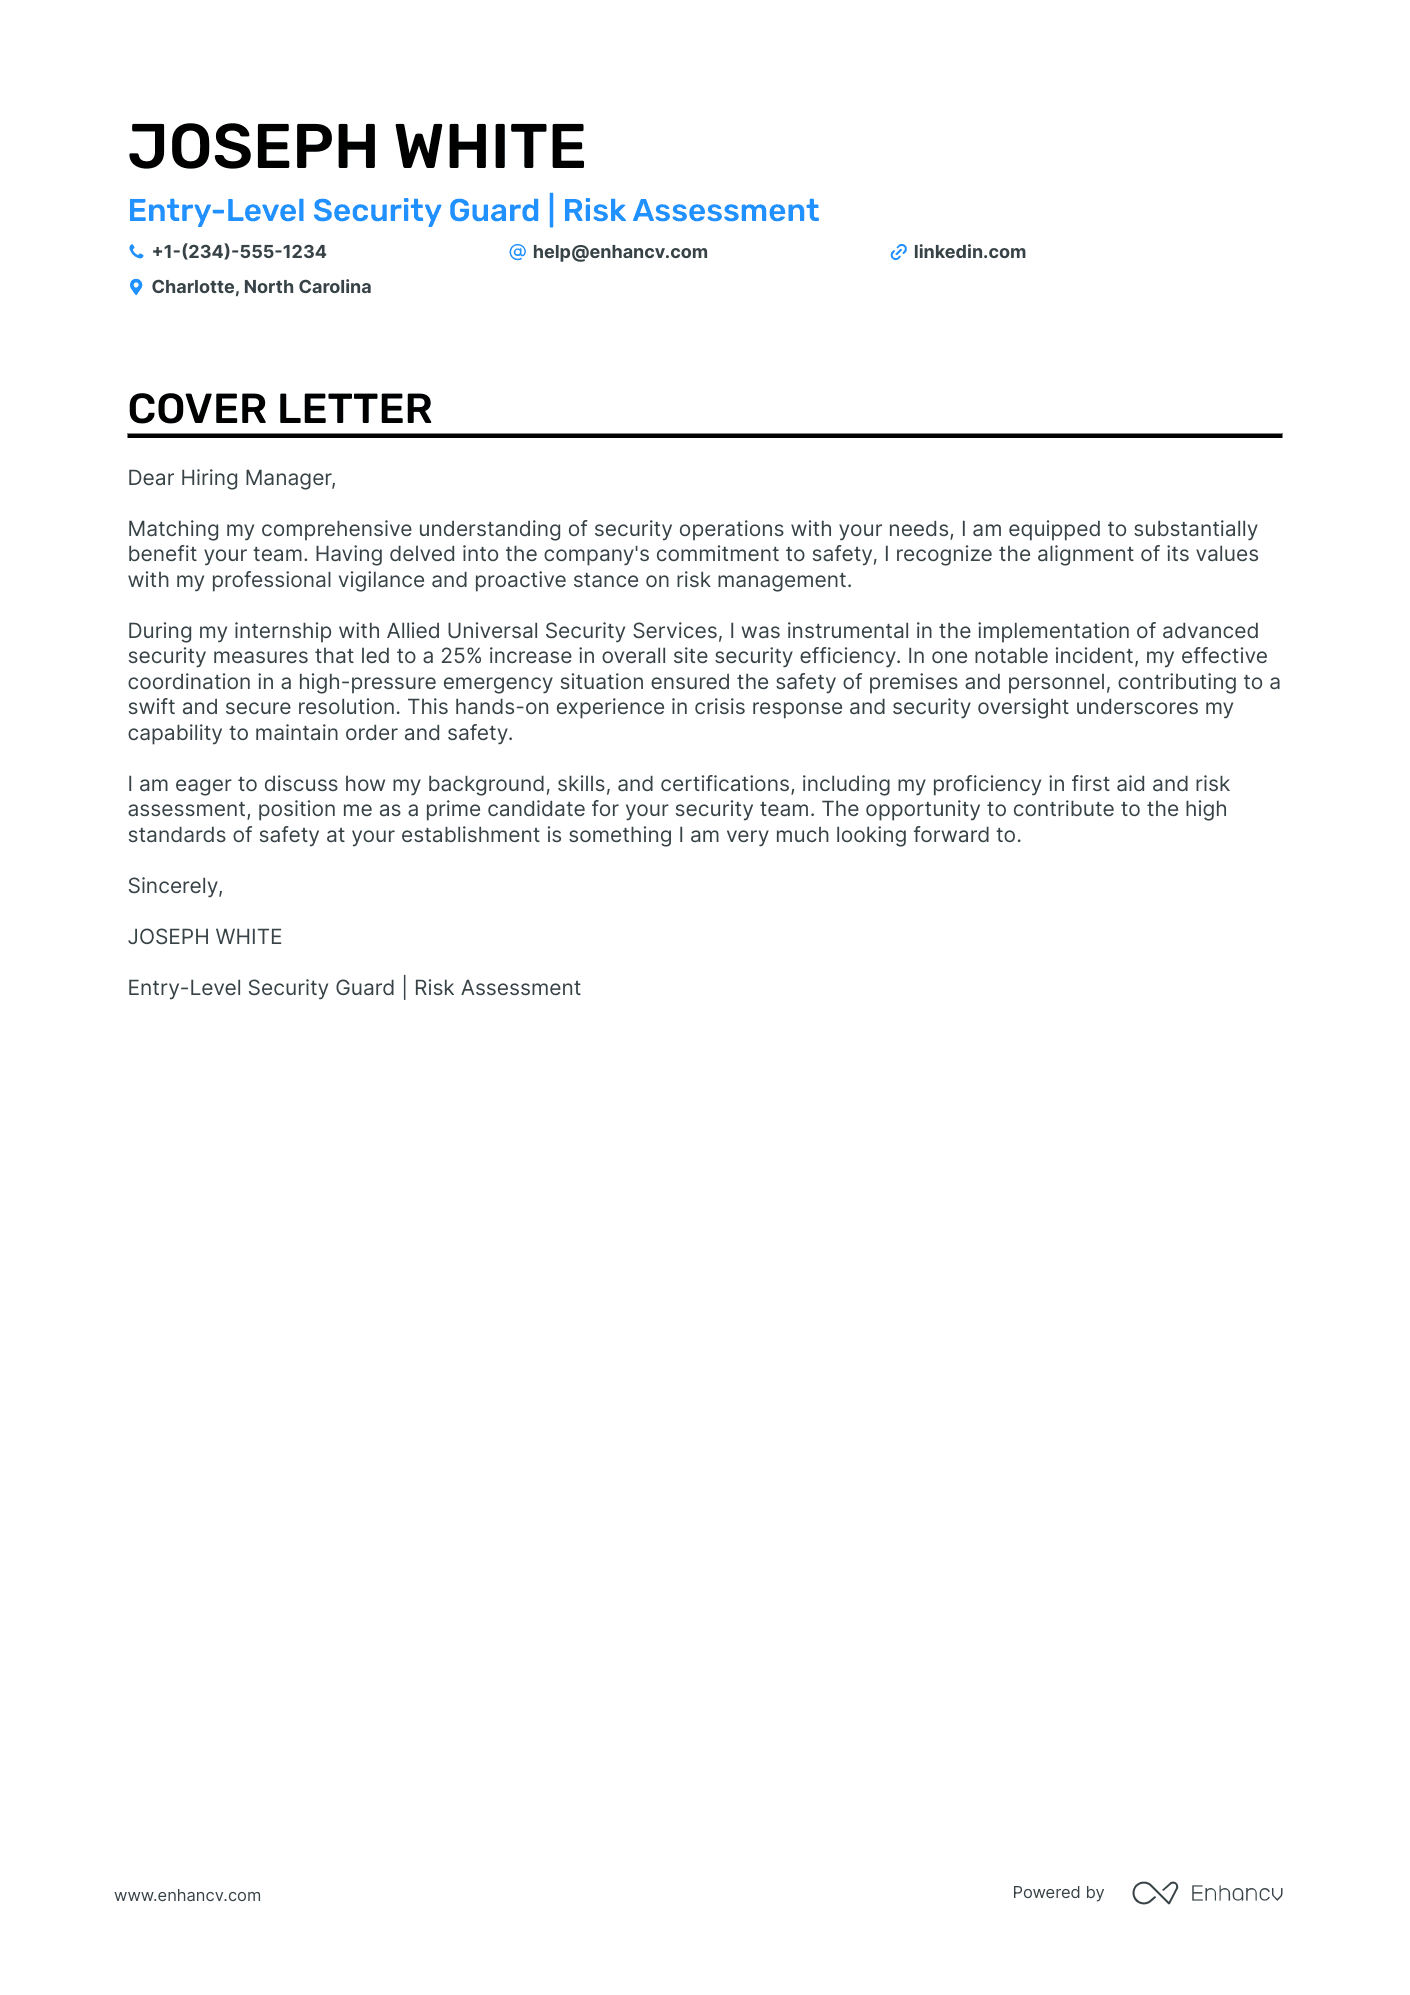 cover letter for a security guard